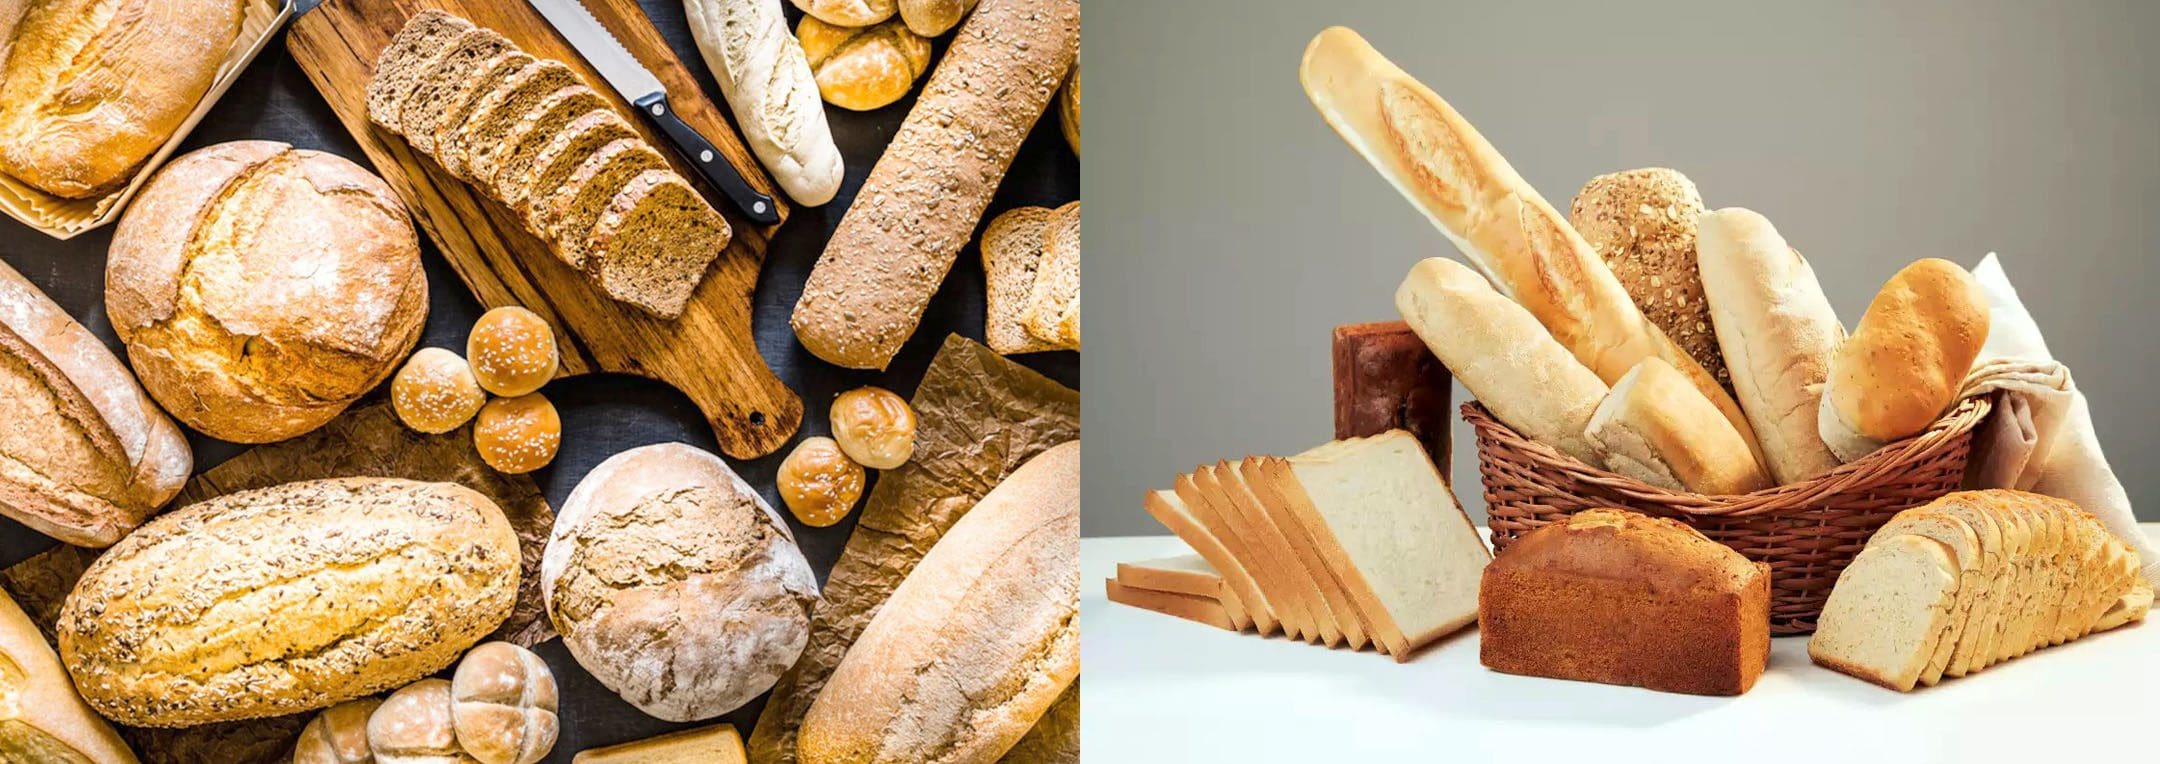 Healthy Breads: EP's Functional Chiropractic Clinic Team